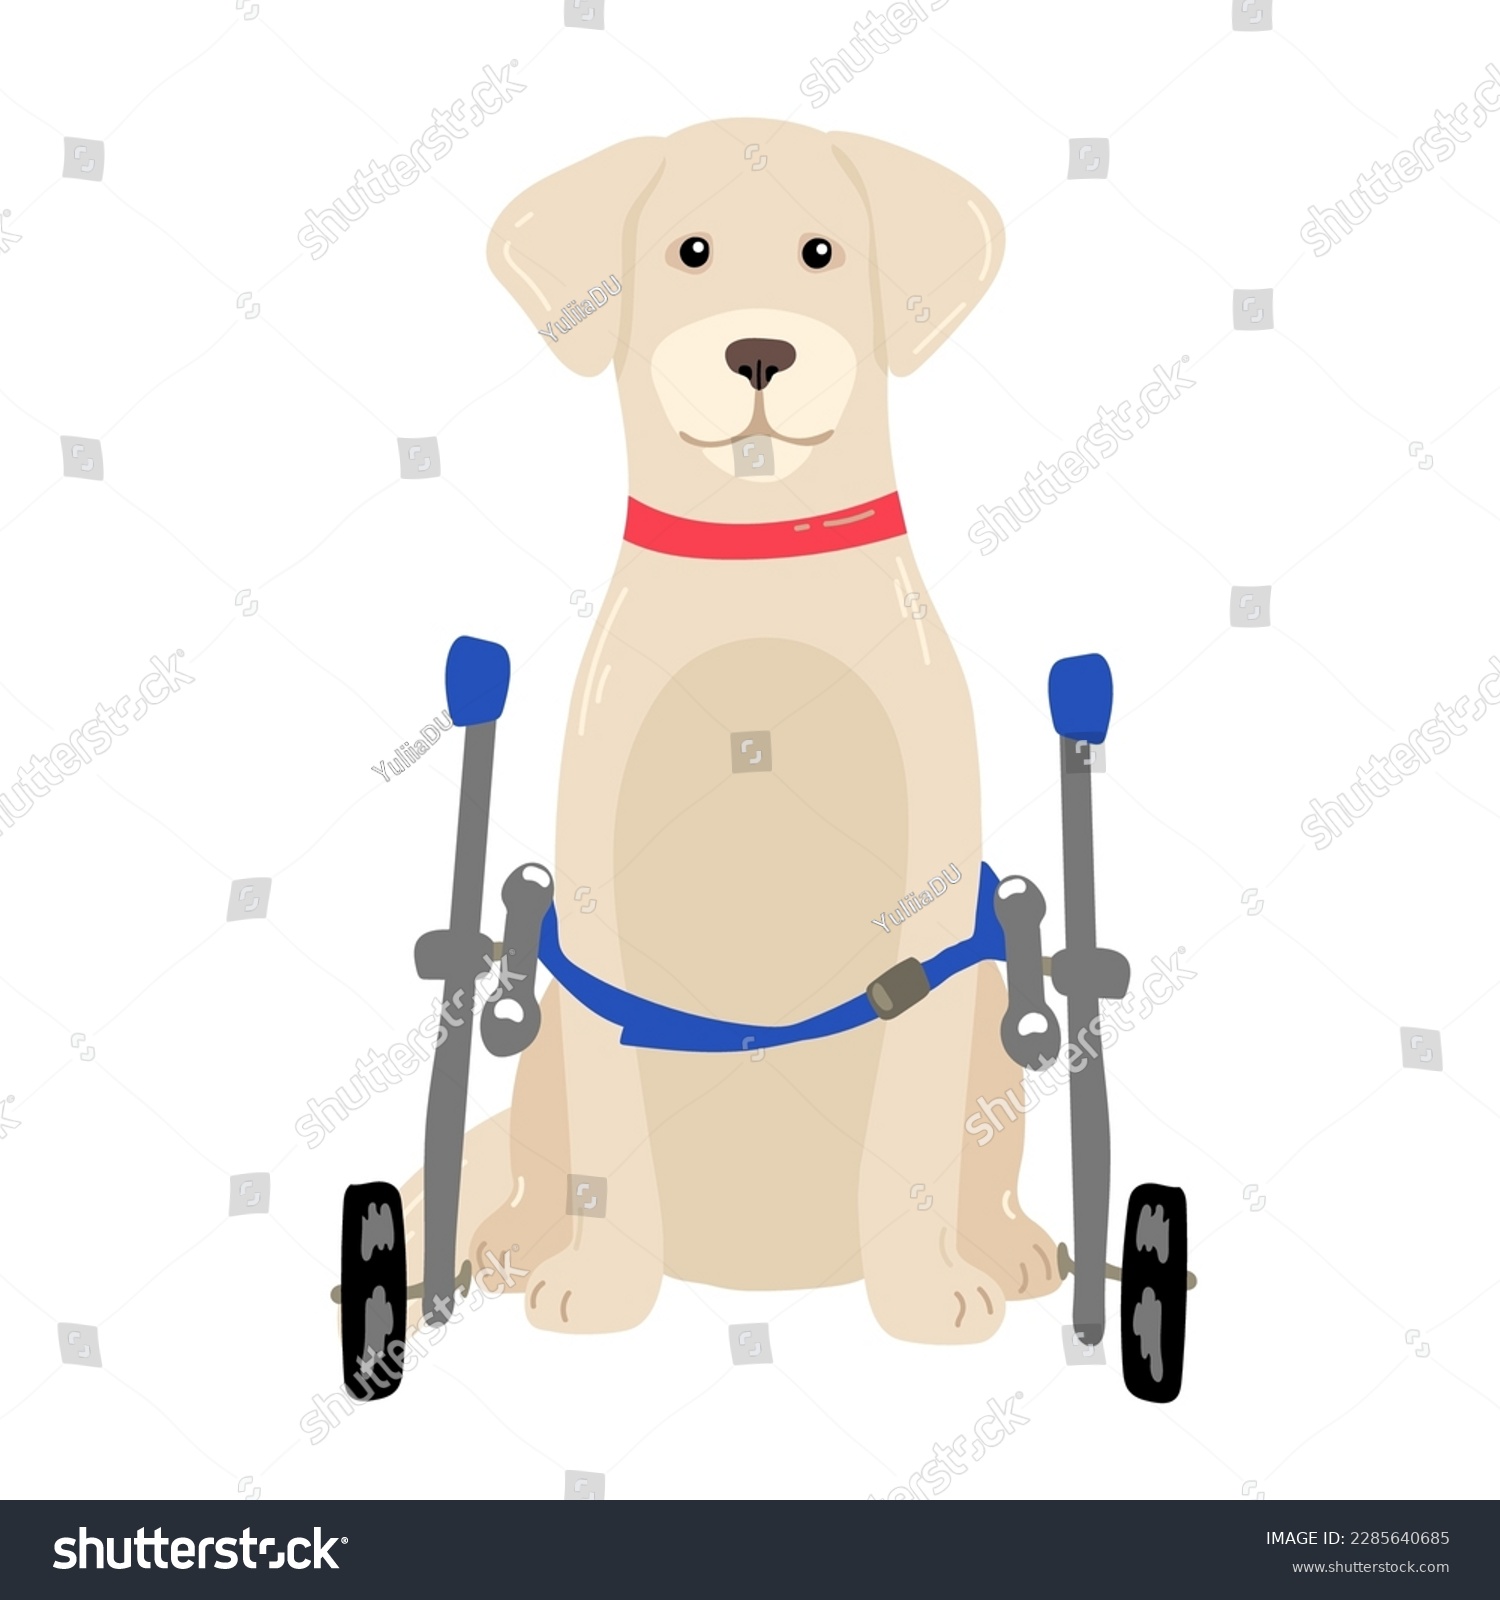 SVG of Dog in a wheelchair for the hind paws. Vector illustration in a flat style svg